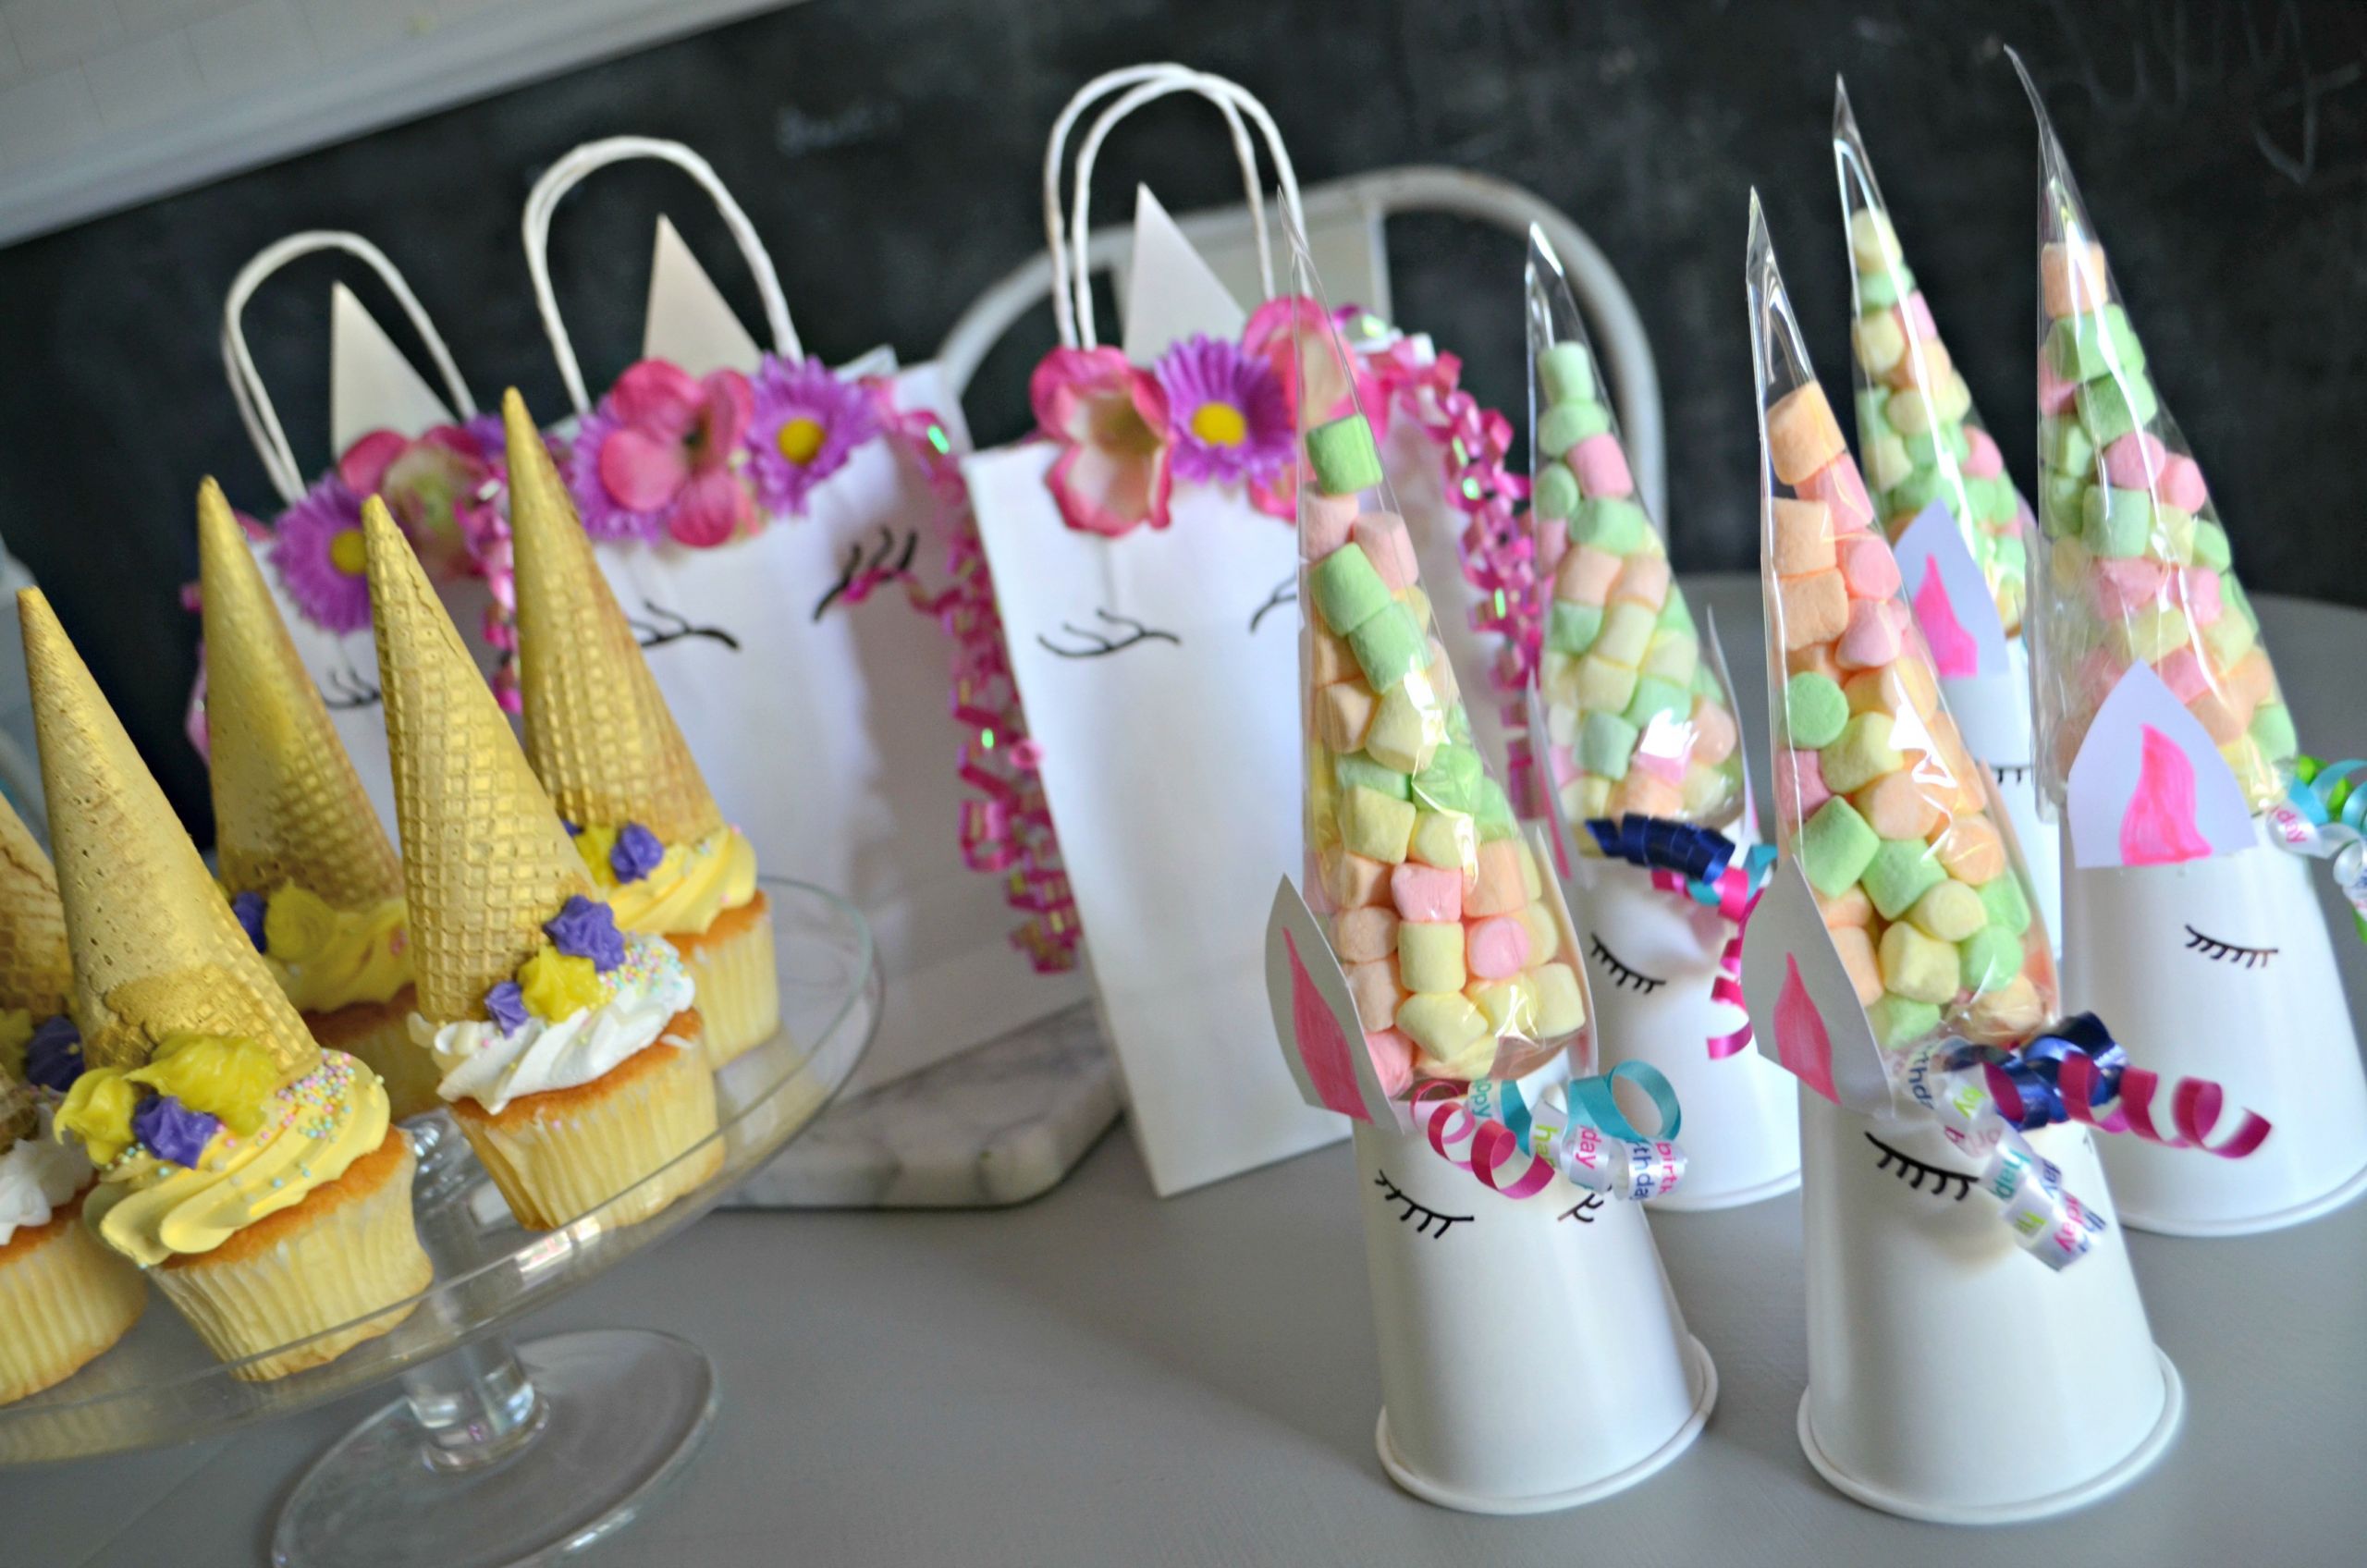 Ideas For Unicorn Party
 Make These 3 Frugal Cute and Easy DIY Unicorn Birthday